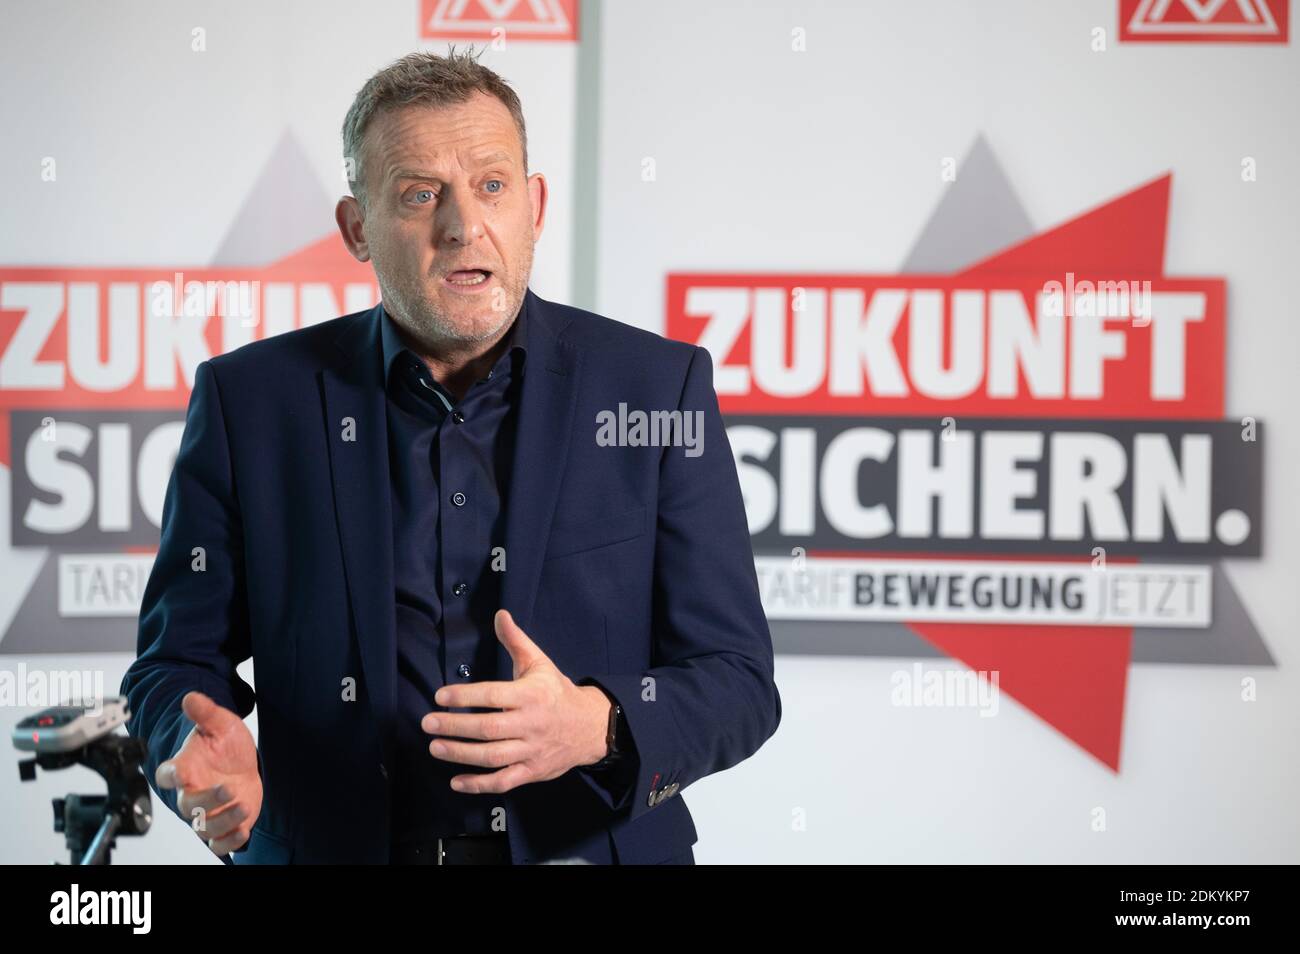 Stuttgart, Germany. 16th Dec, 2020. Roman Zitzelsberger, district leader and negotiator of IG Metall Baden-Württemberg, speaks at the beginning of the collective bargaining for the metal and electrical industry in Baden-Württemberg. Credit: Sebastian Gollnow/dpa/Alamy Live News Stock Photo